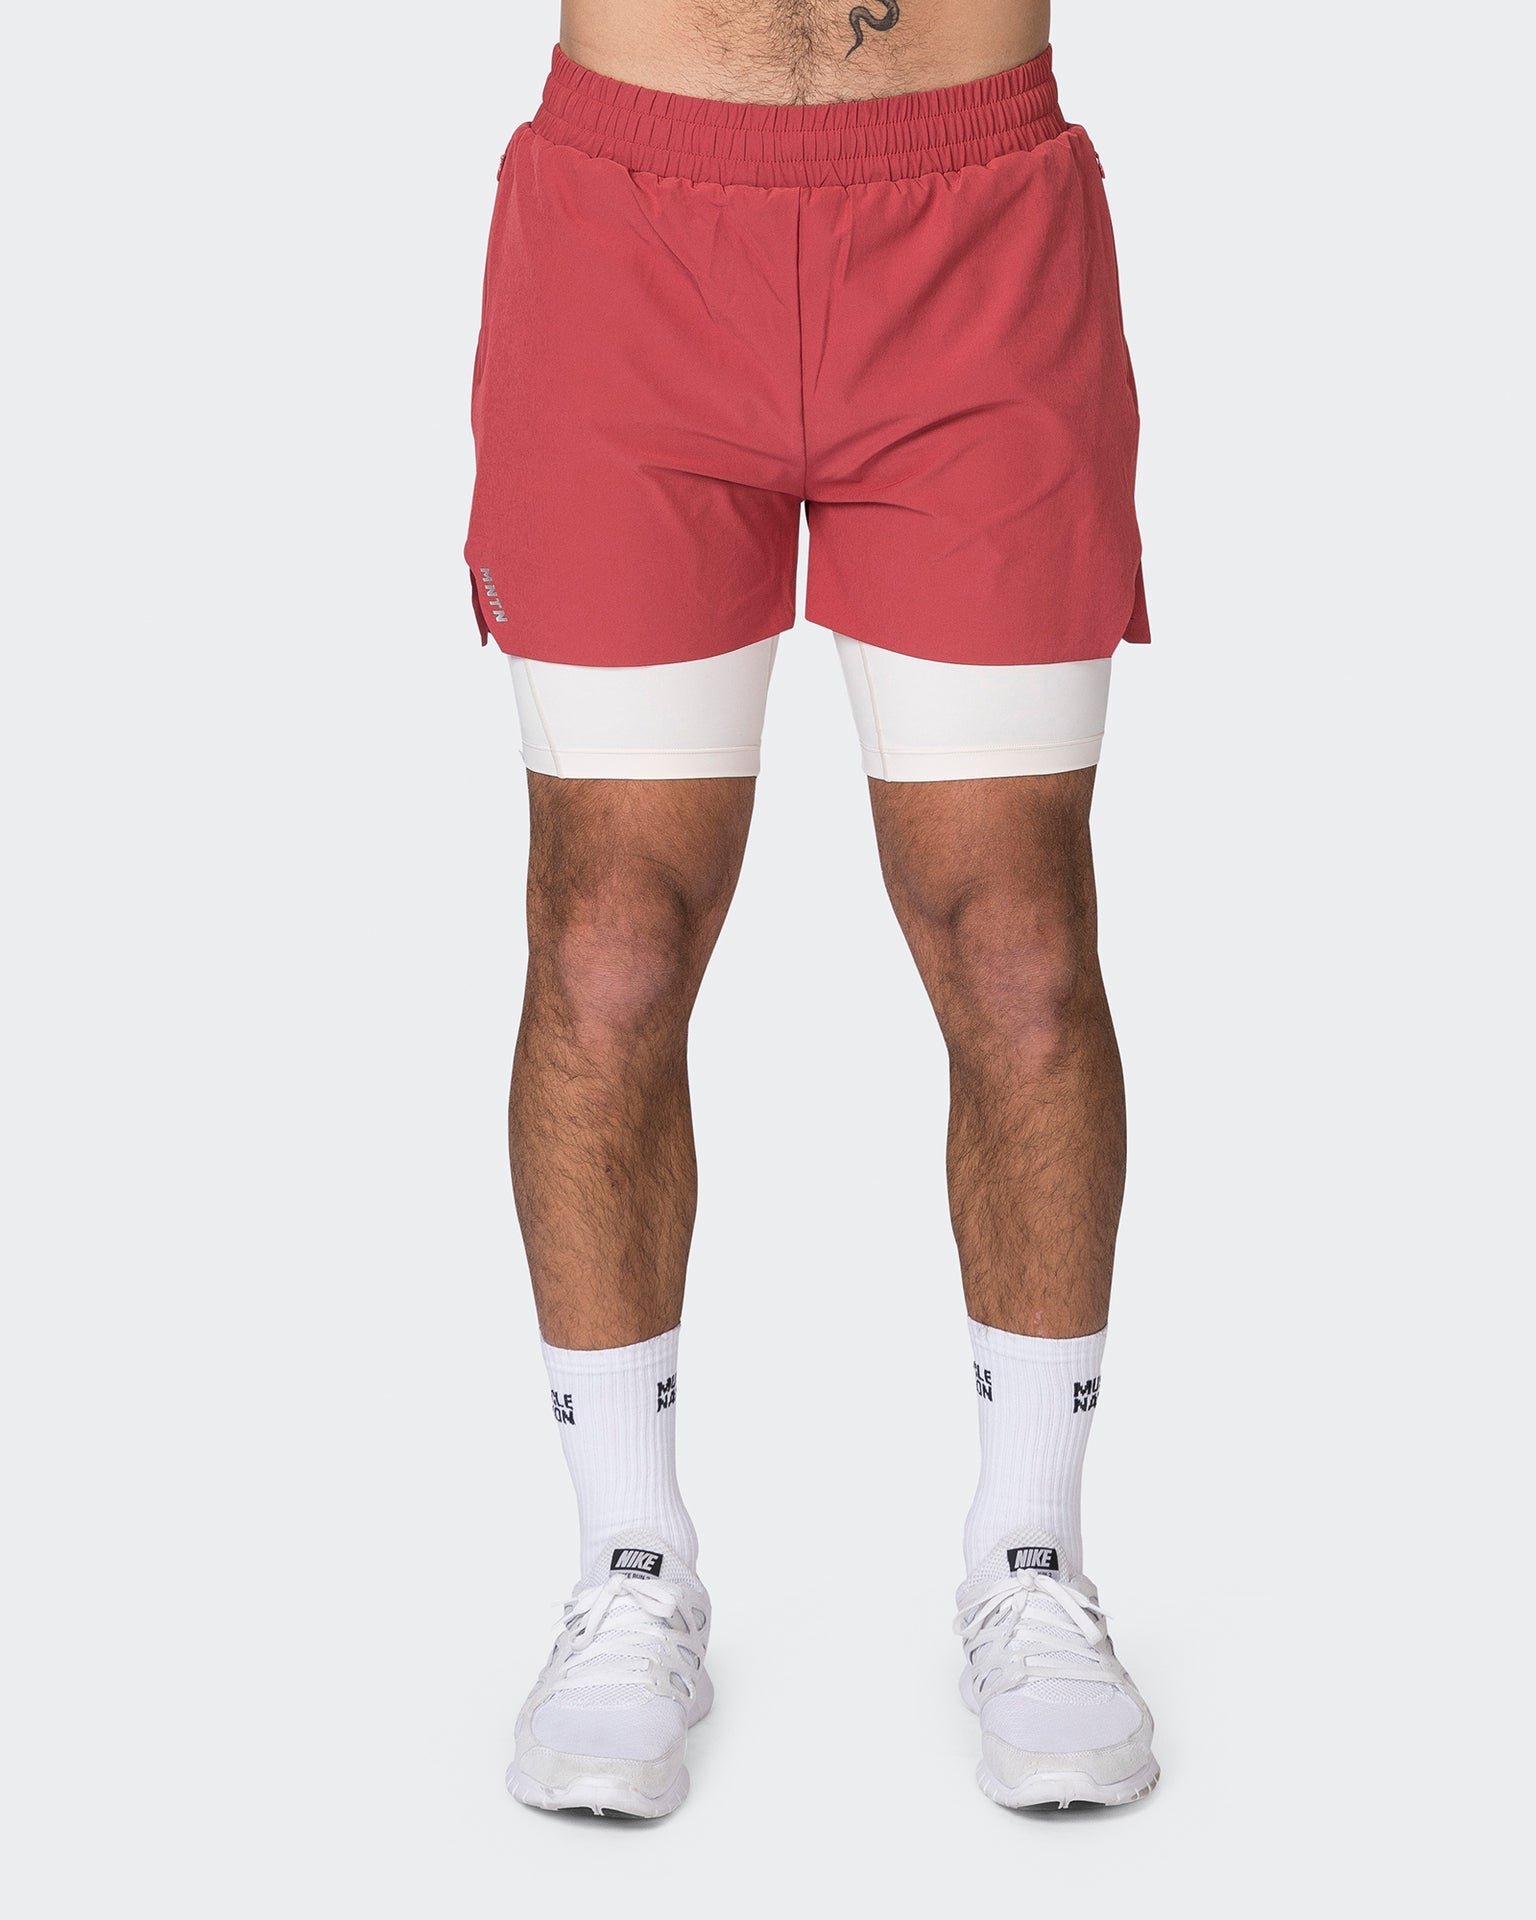 Muscle Nation Gym Shorts Replay 3" Shorts - Dusty Red